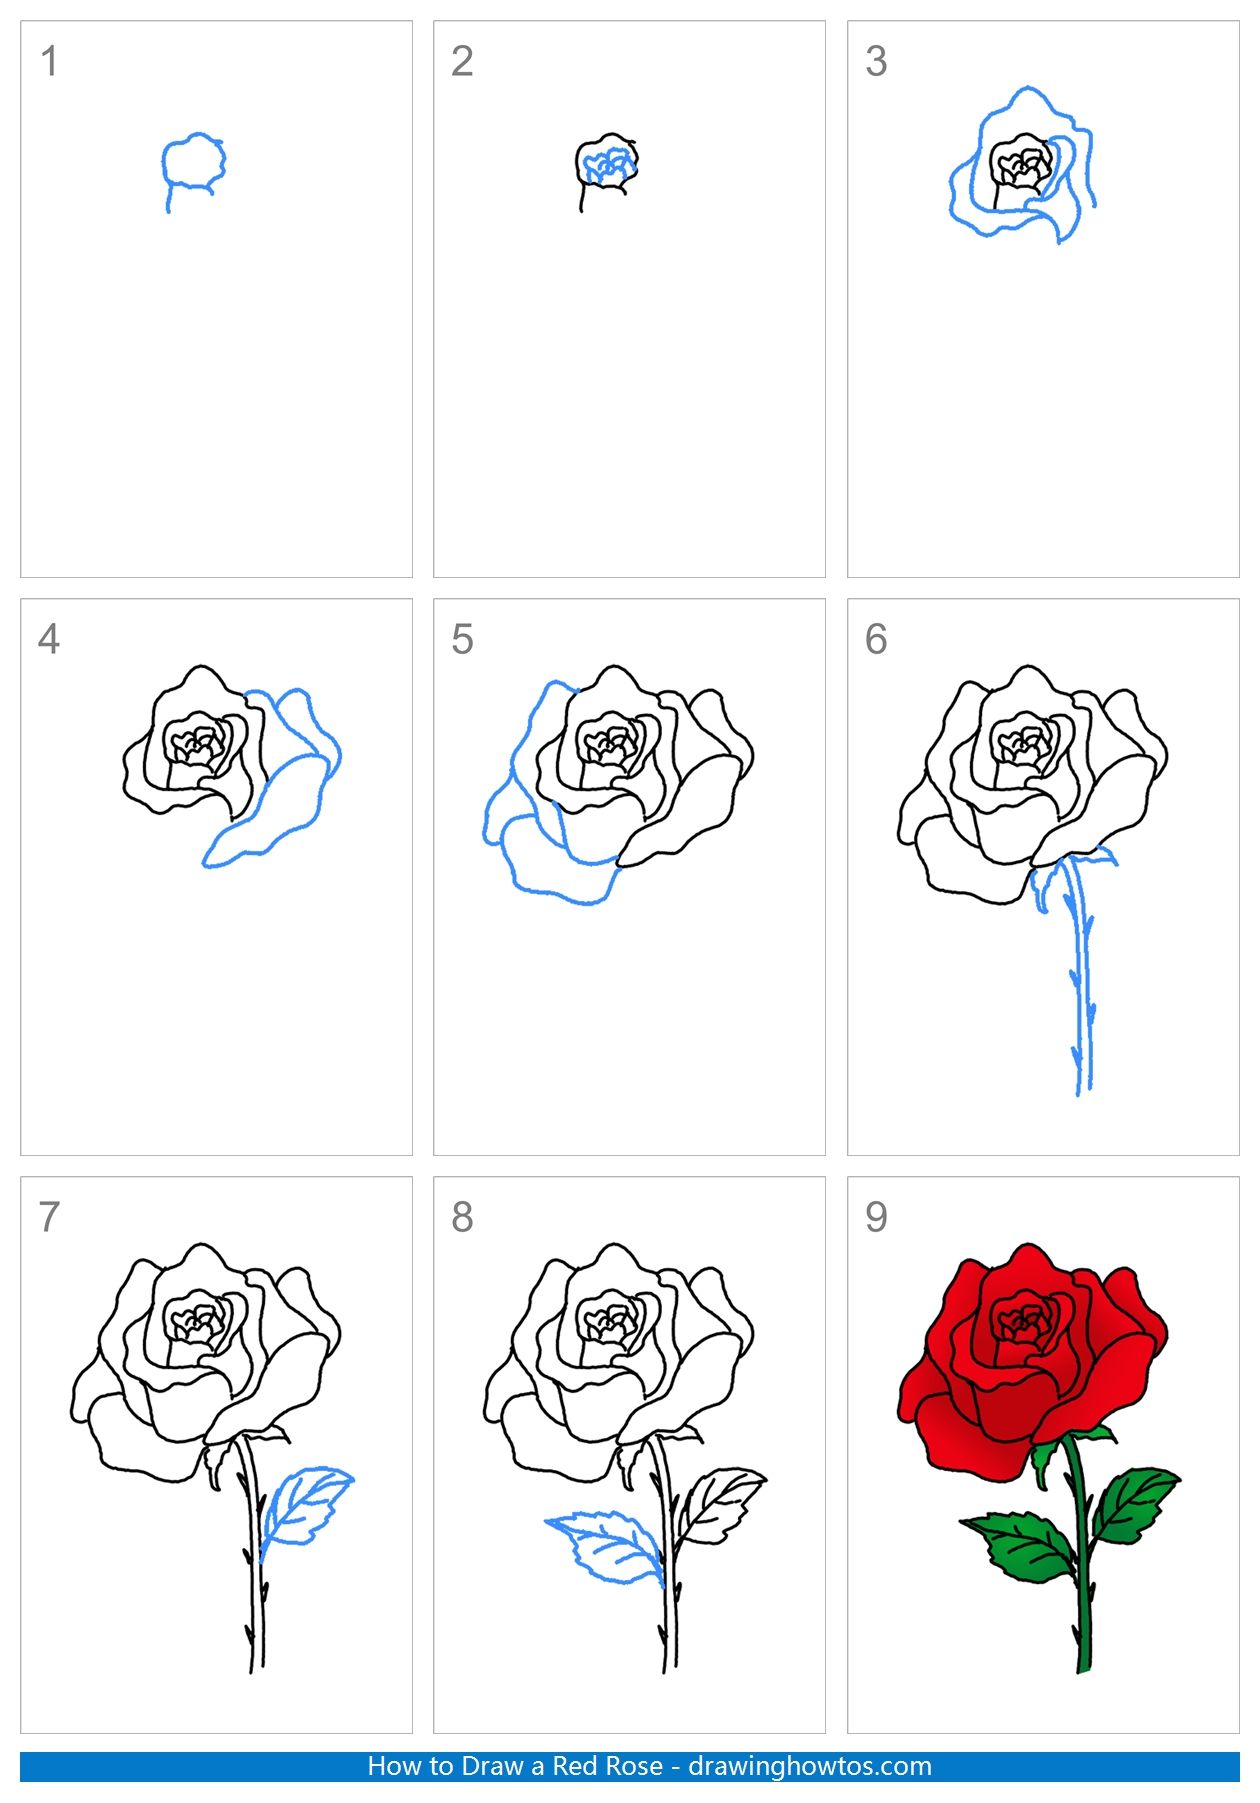 How to Draw a Red Rose Step by Step